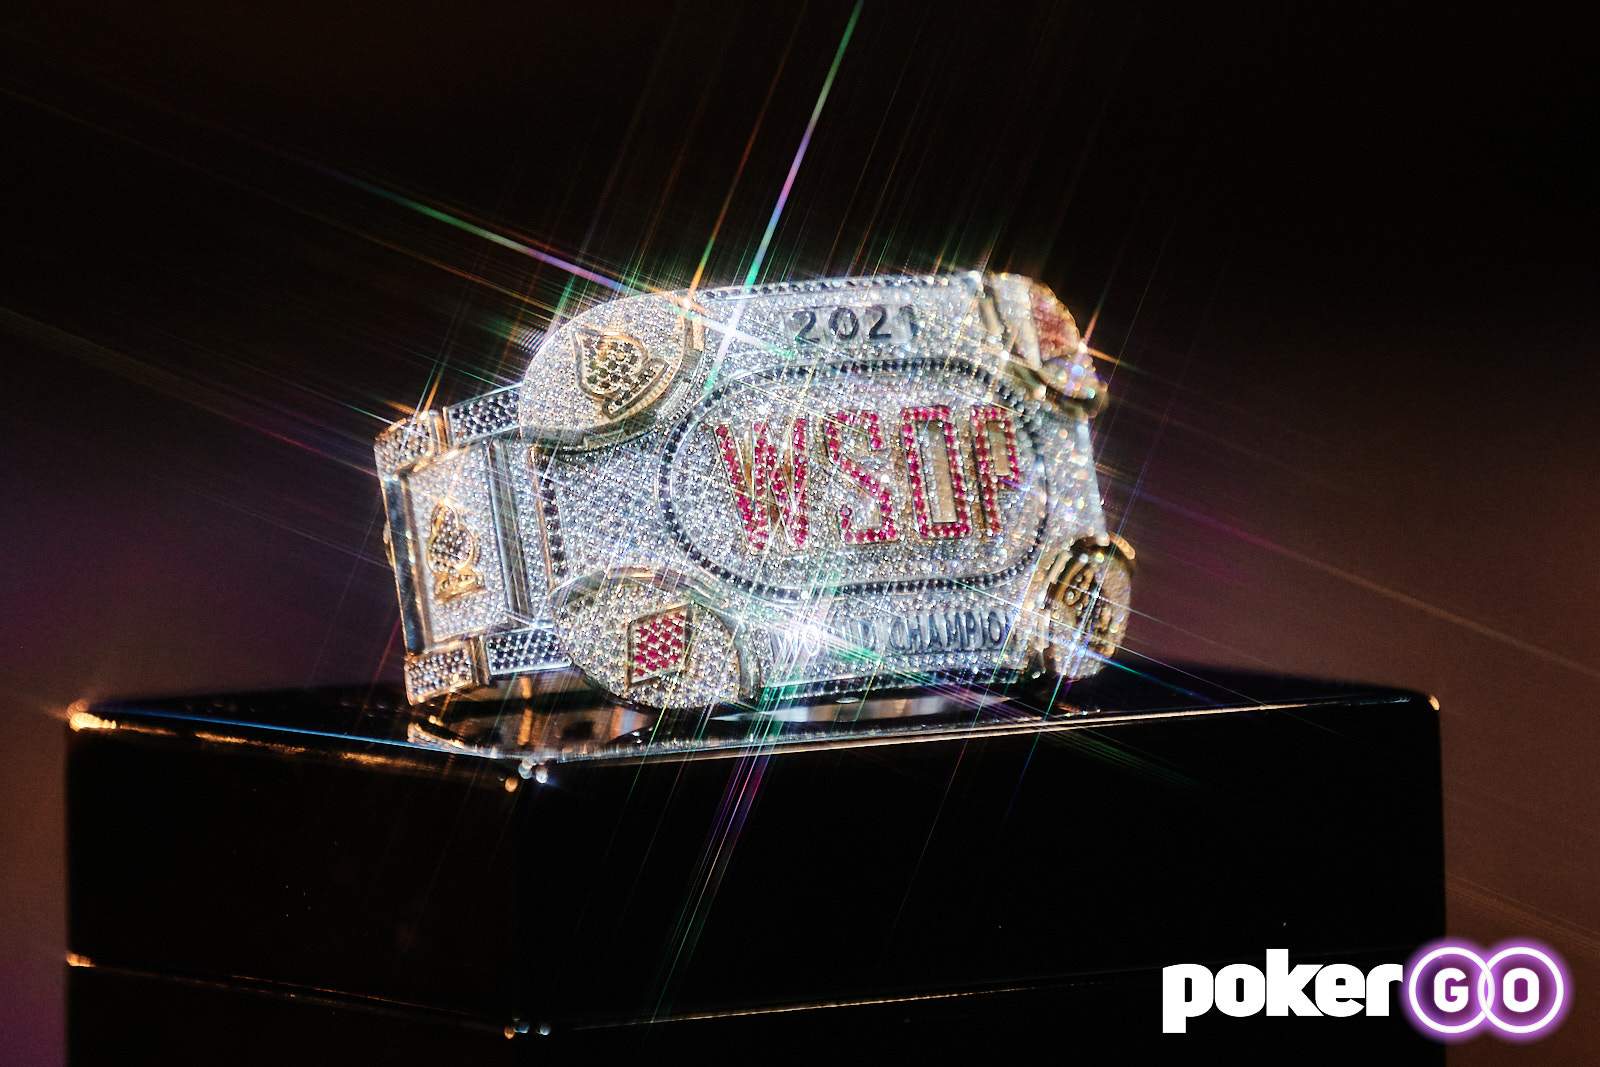 WSOP Day 41 Review: Hellmuth and Jungleman Entrance Thrills Main Event, Petrangelo and Kanit Both Crush Day 2